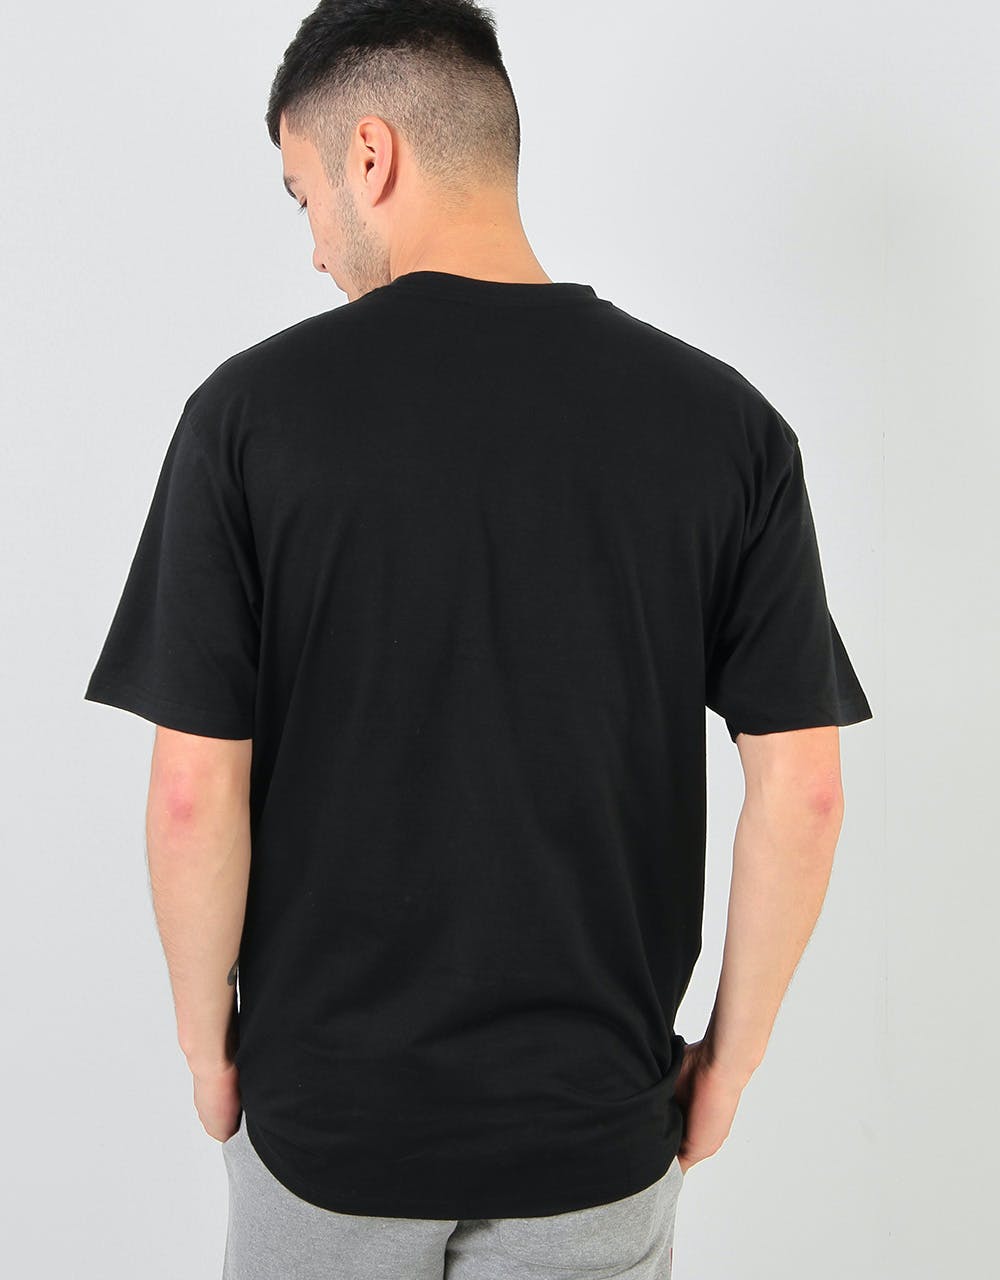 Independent TC Embroidery T-Shirt - Black